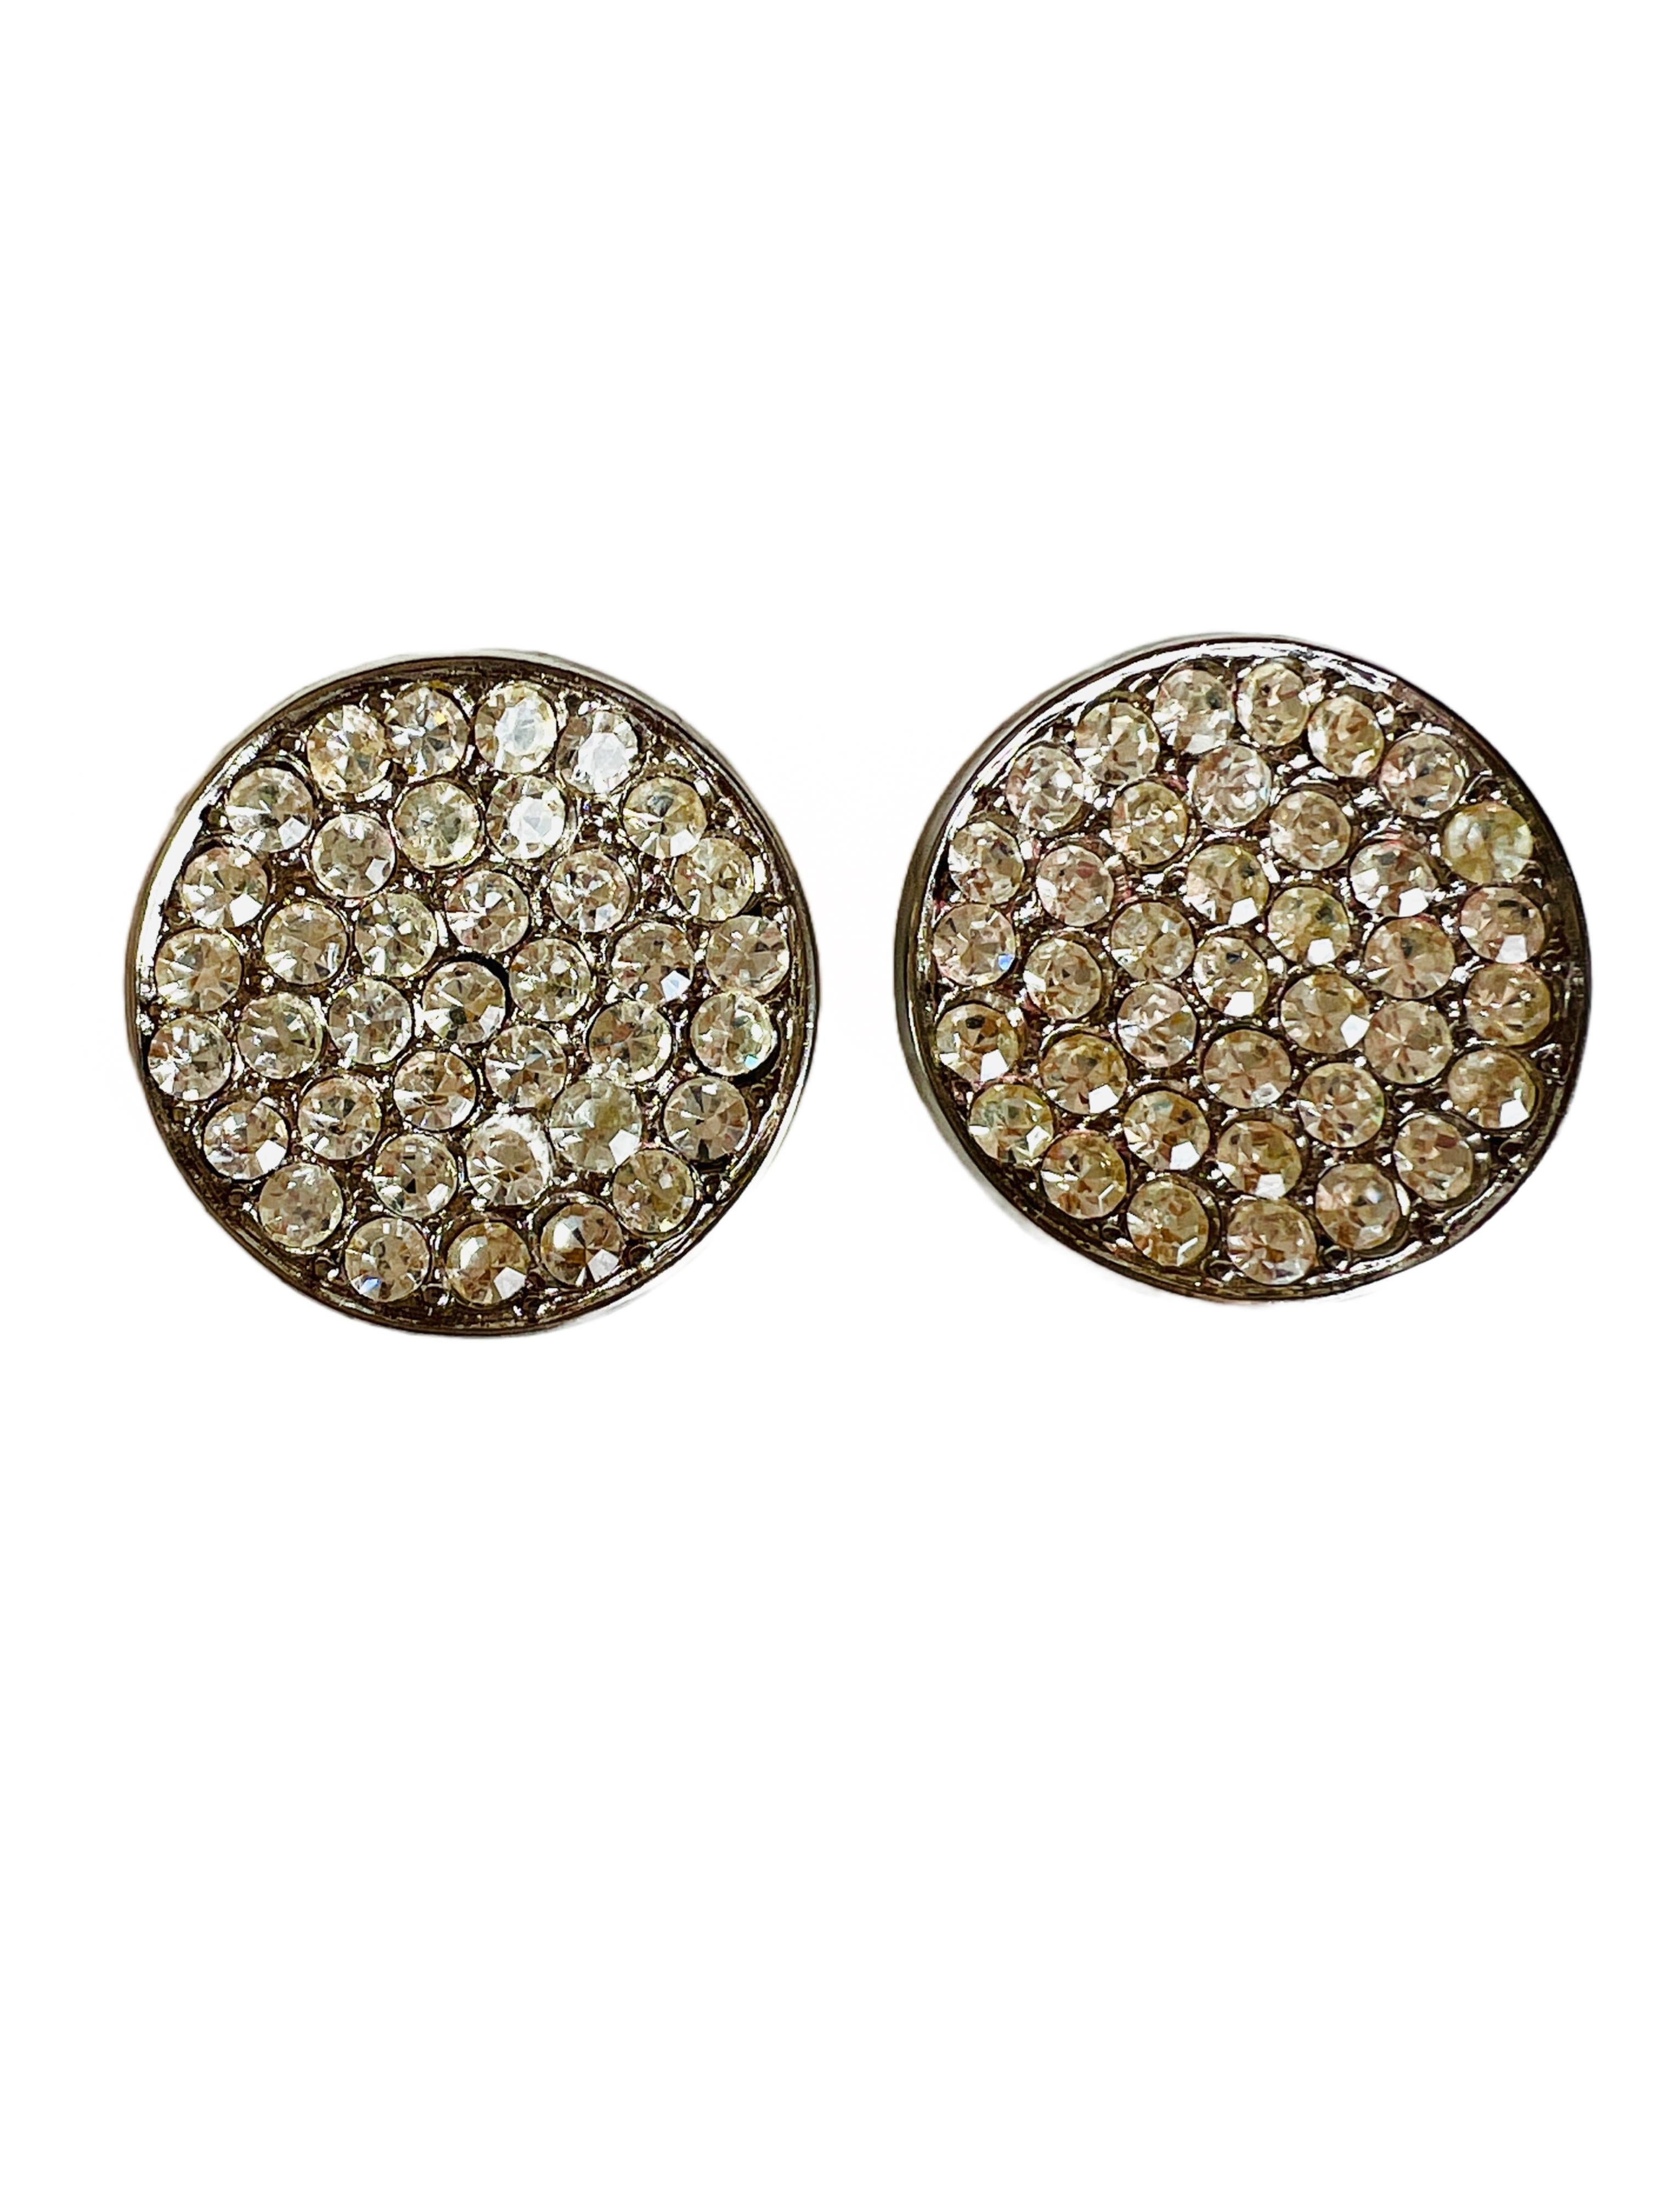 Pierre Cardin Rhinestone Silver Plated Arched Circular Clip on Earrings In Good Condition For Sale In Sausalito, CA